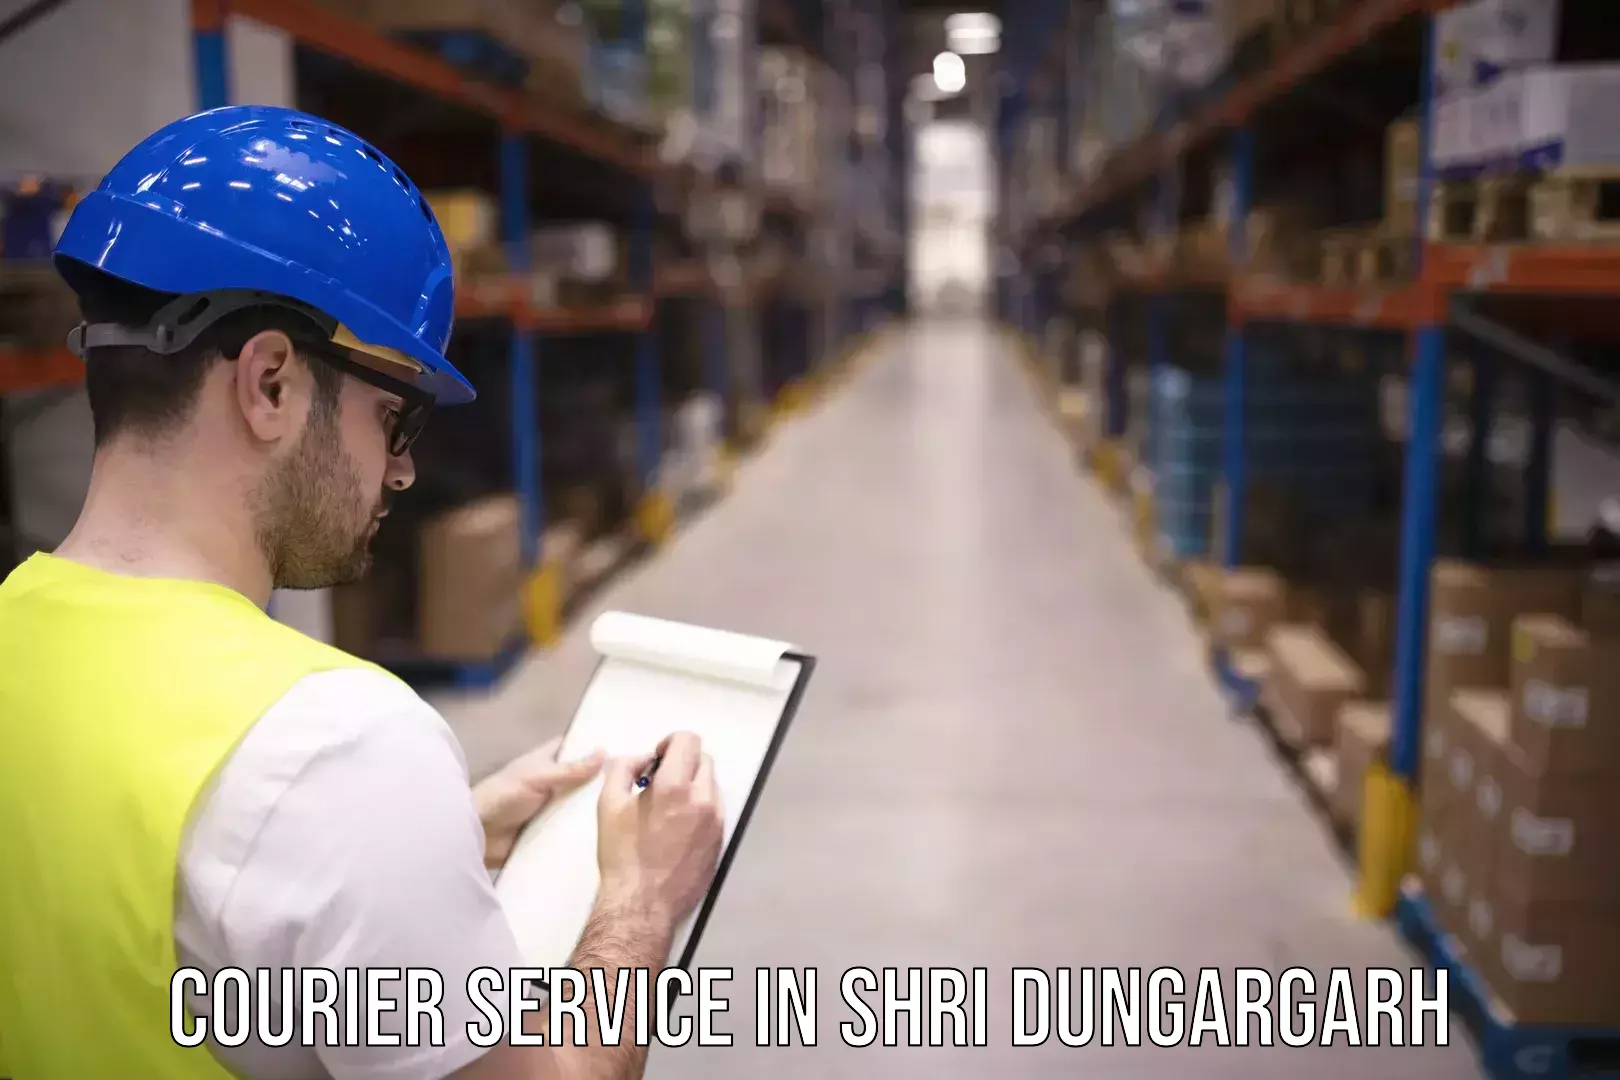 Express delivery solutions in Shri Dungargarh